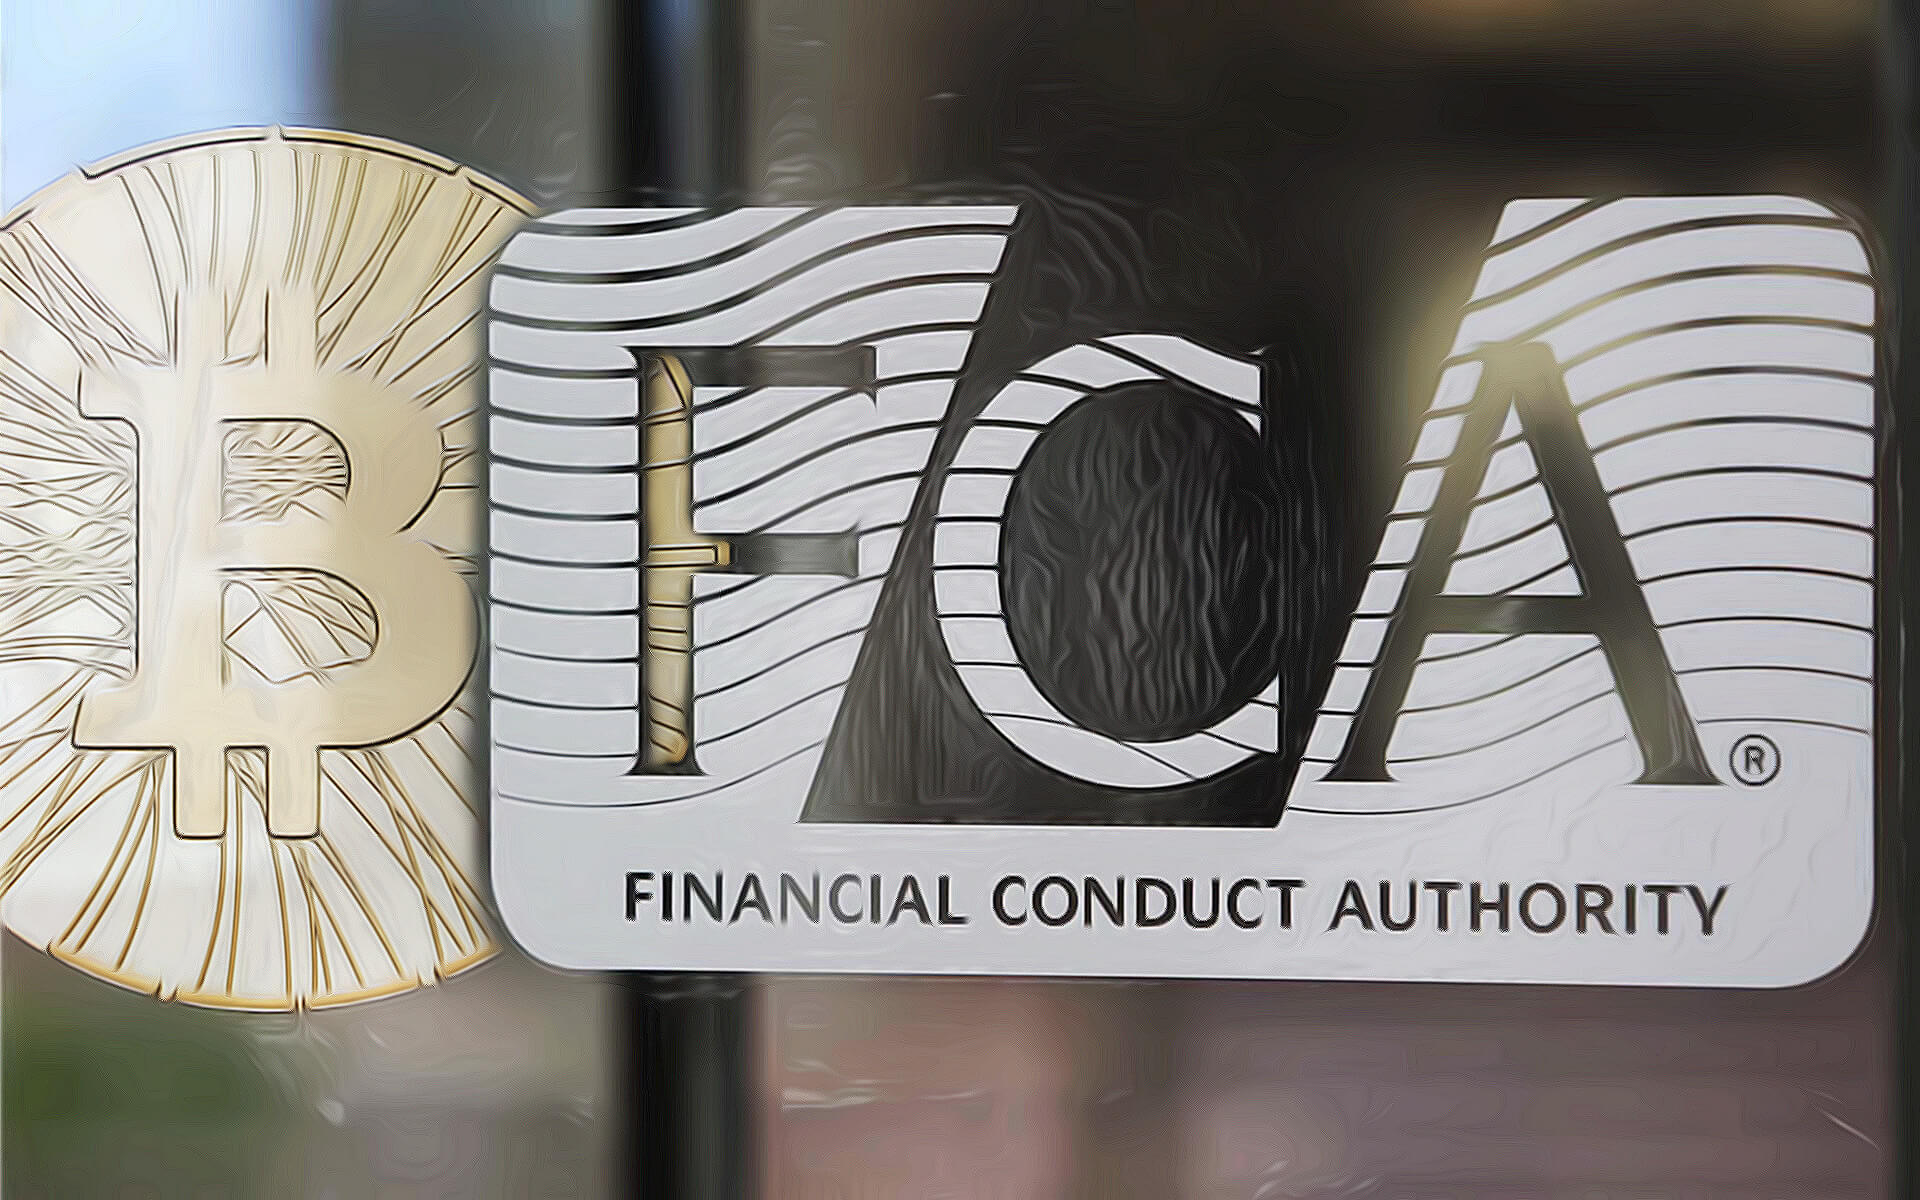 uk-financial-regulator-publicly-consults-on-guidance-for-cryptoasset-activities